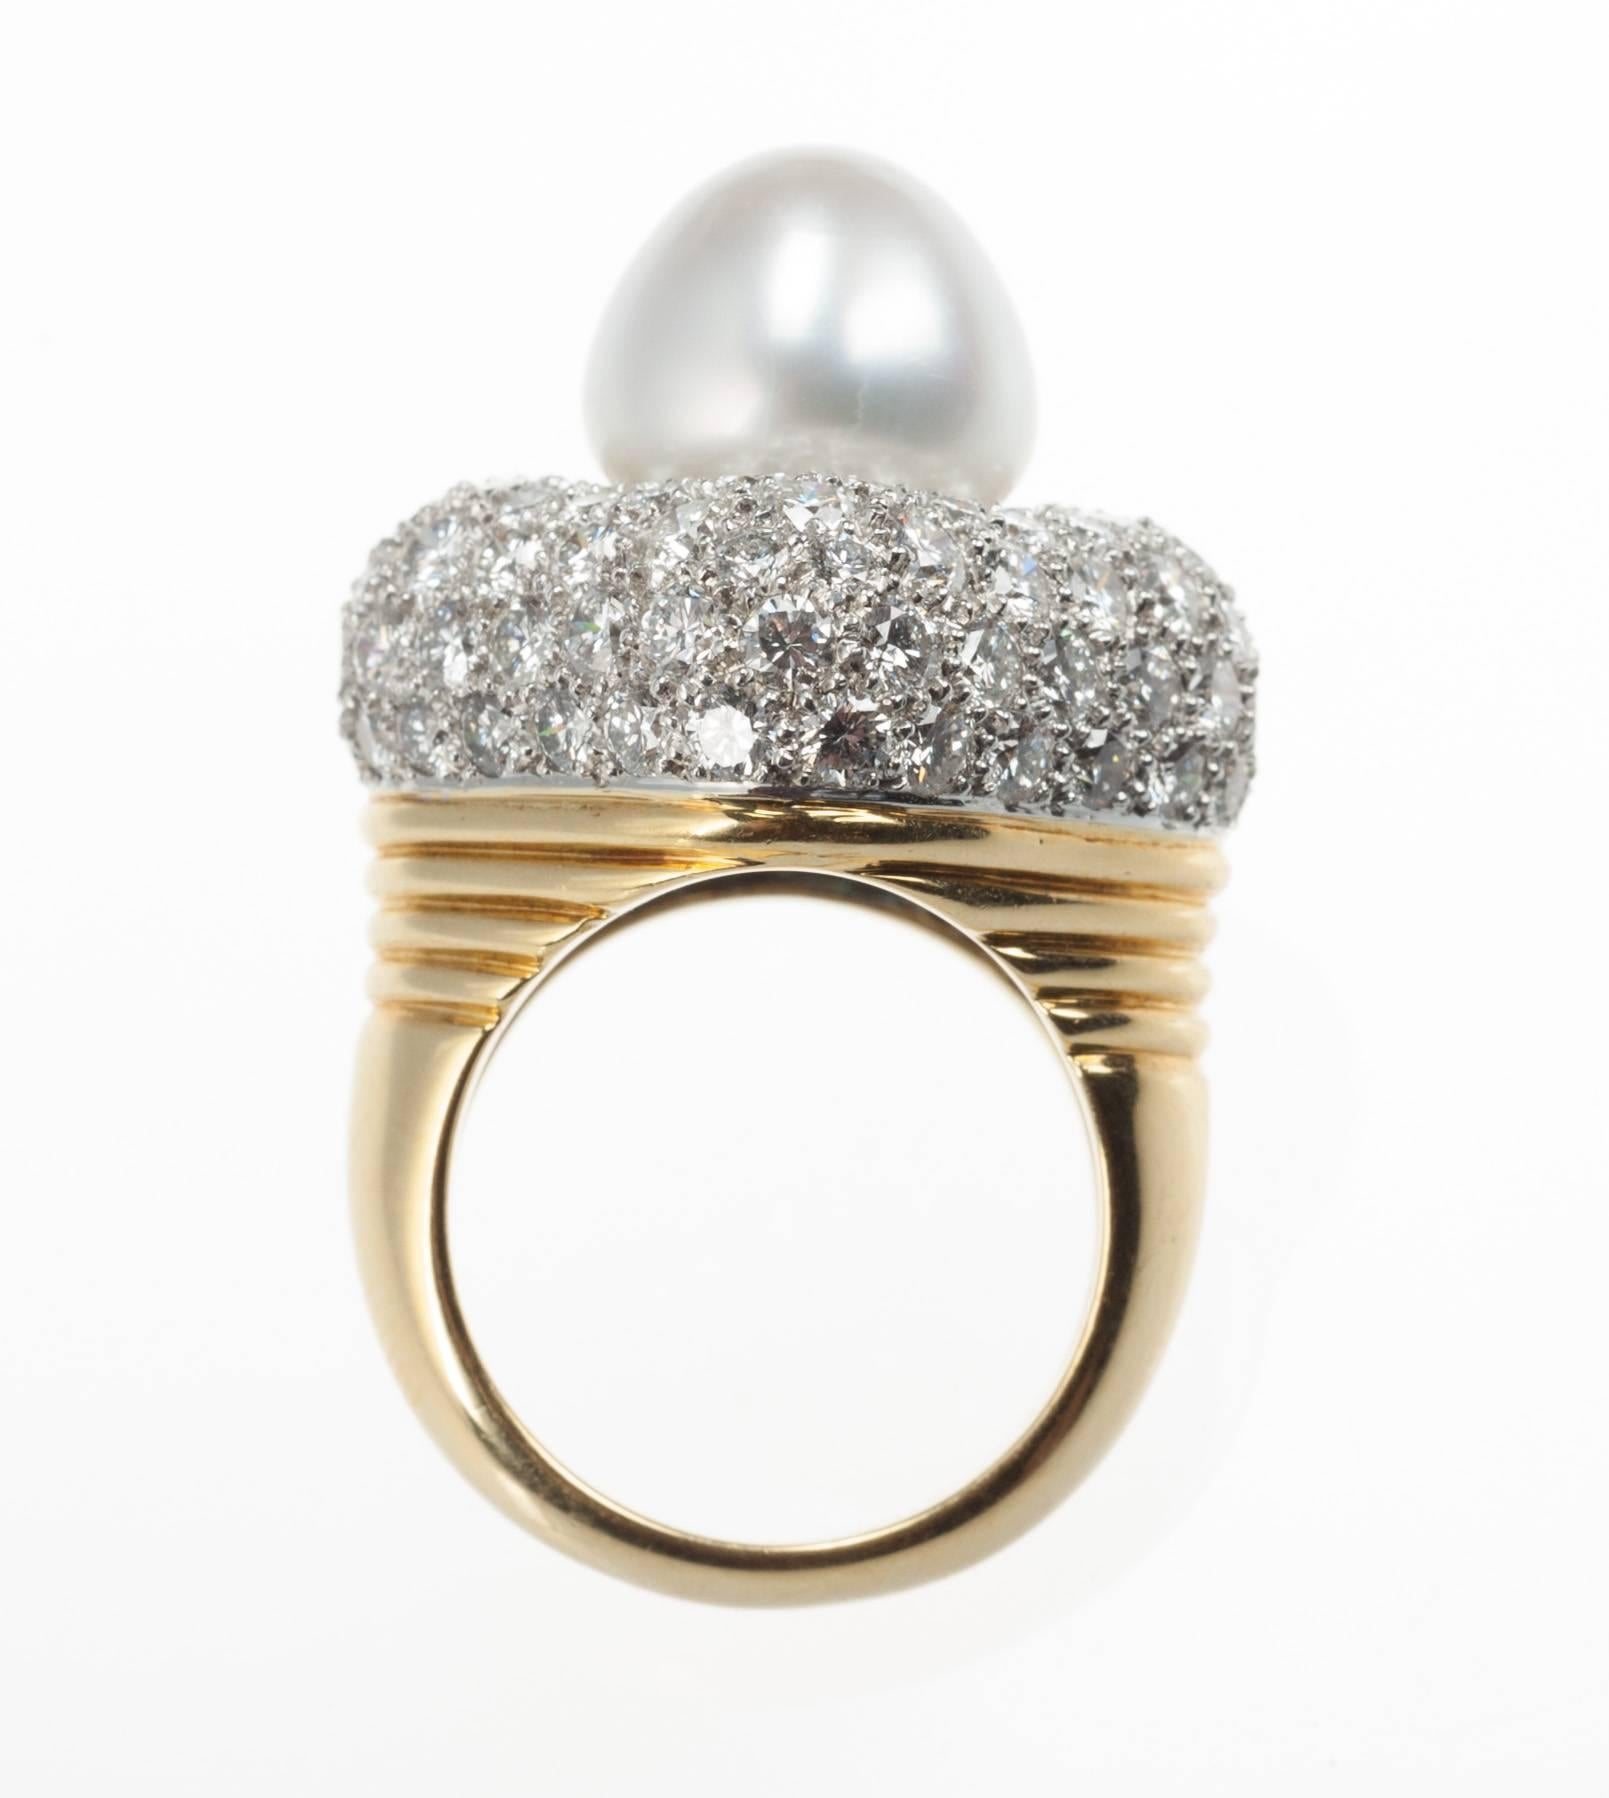 A single South Sea cultured pearl is set atop a pillow of platinum pavé-set with 110 diamonds, 5.90ctw. of G-H color and VS clarity, in this 18-karat yellow gold ring. Pearl measures 12mm in diameter. Size 6.5; can be sized. Top of ring measures